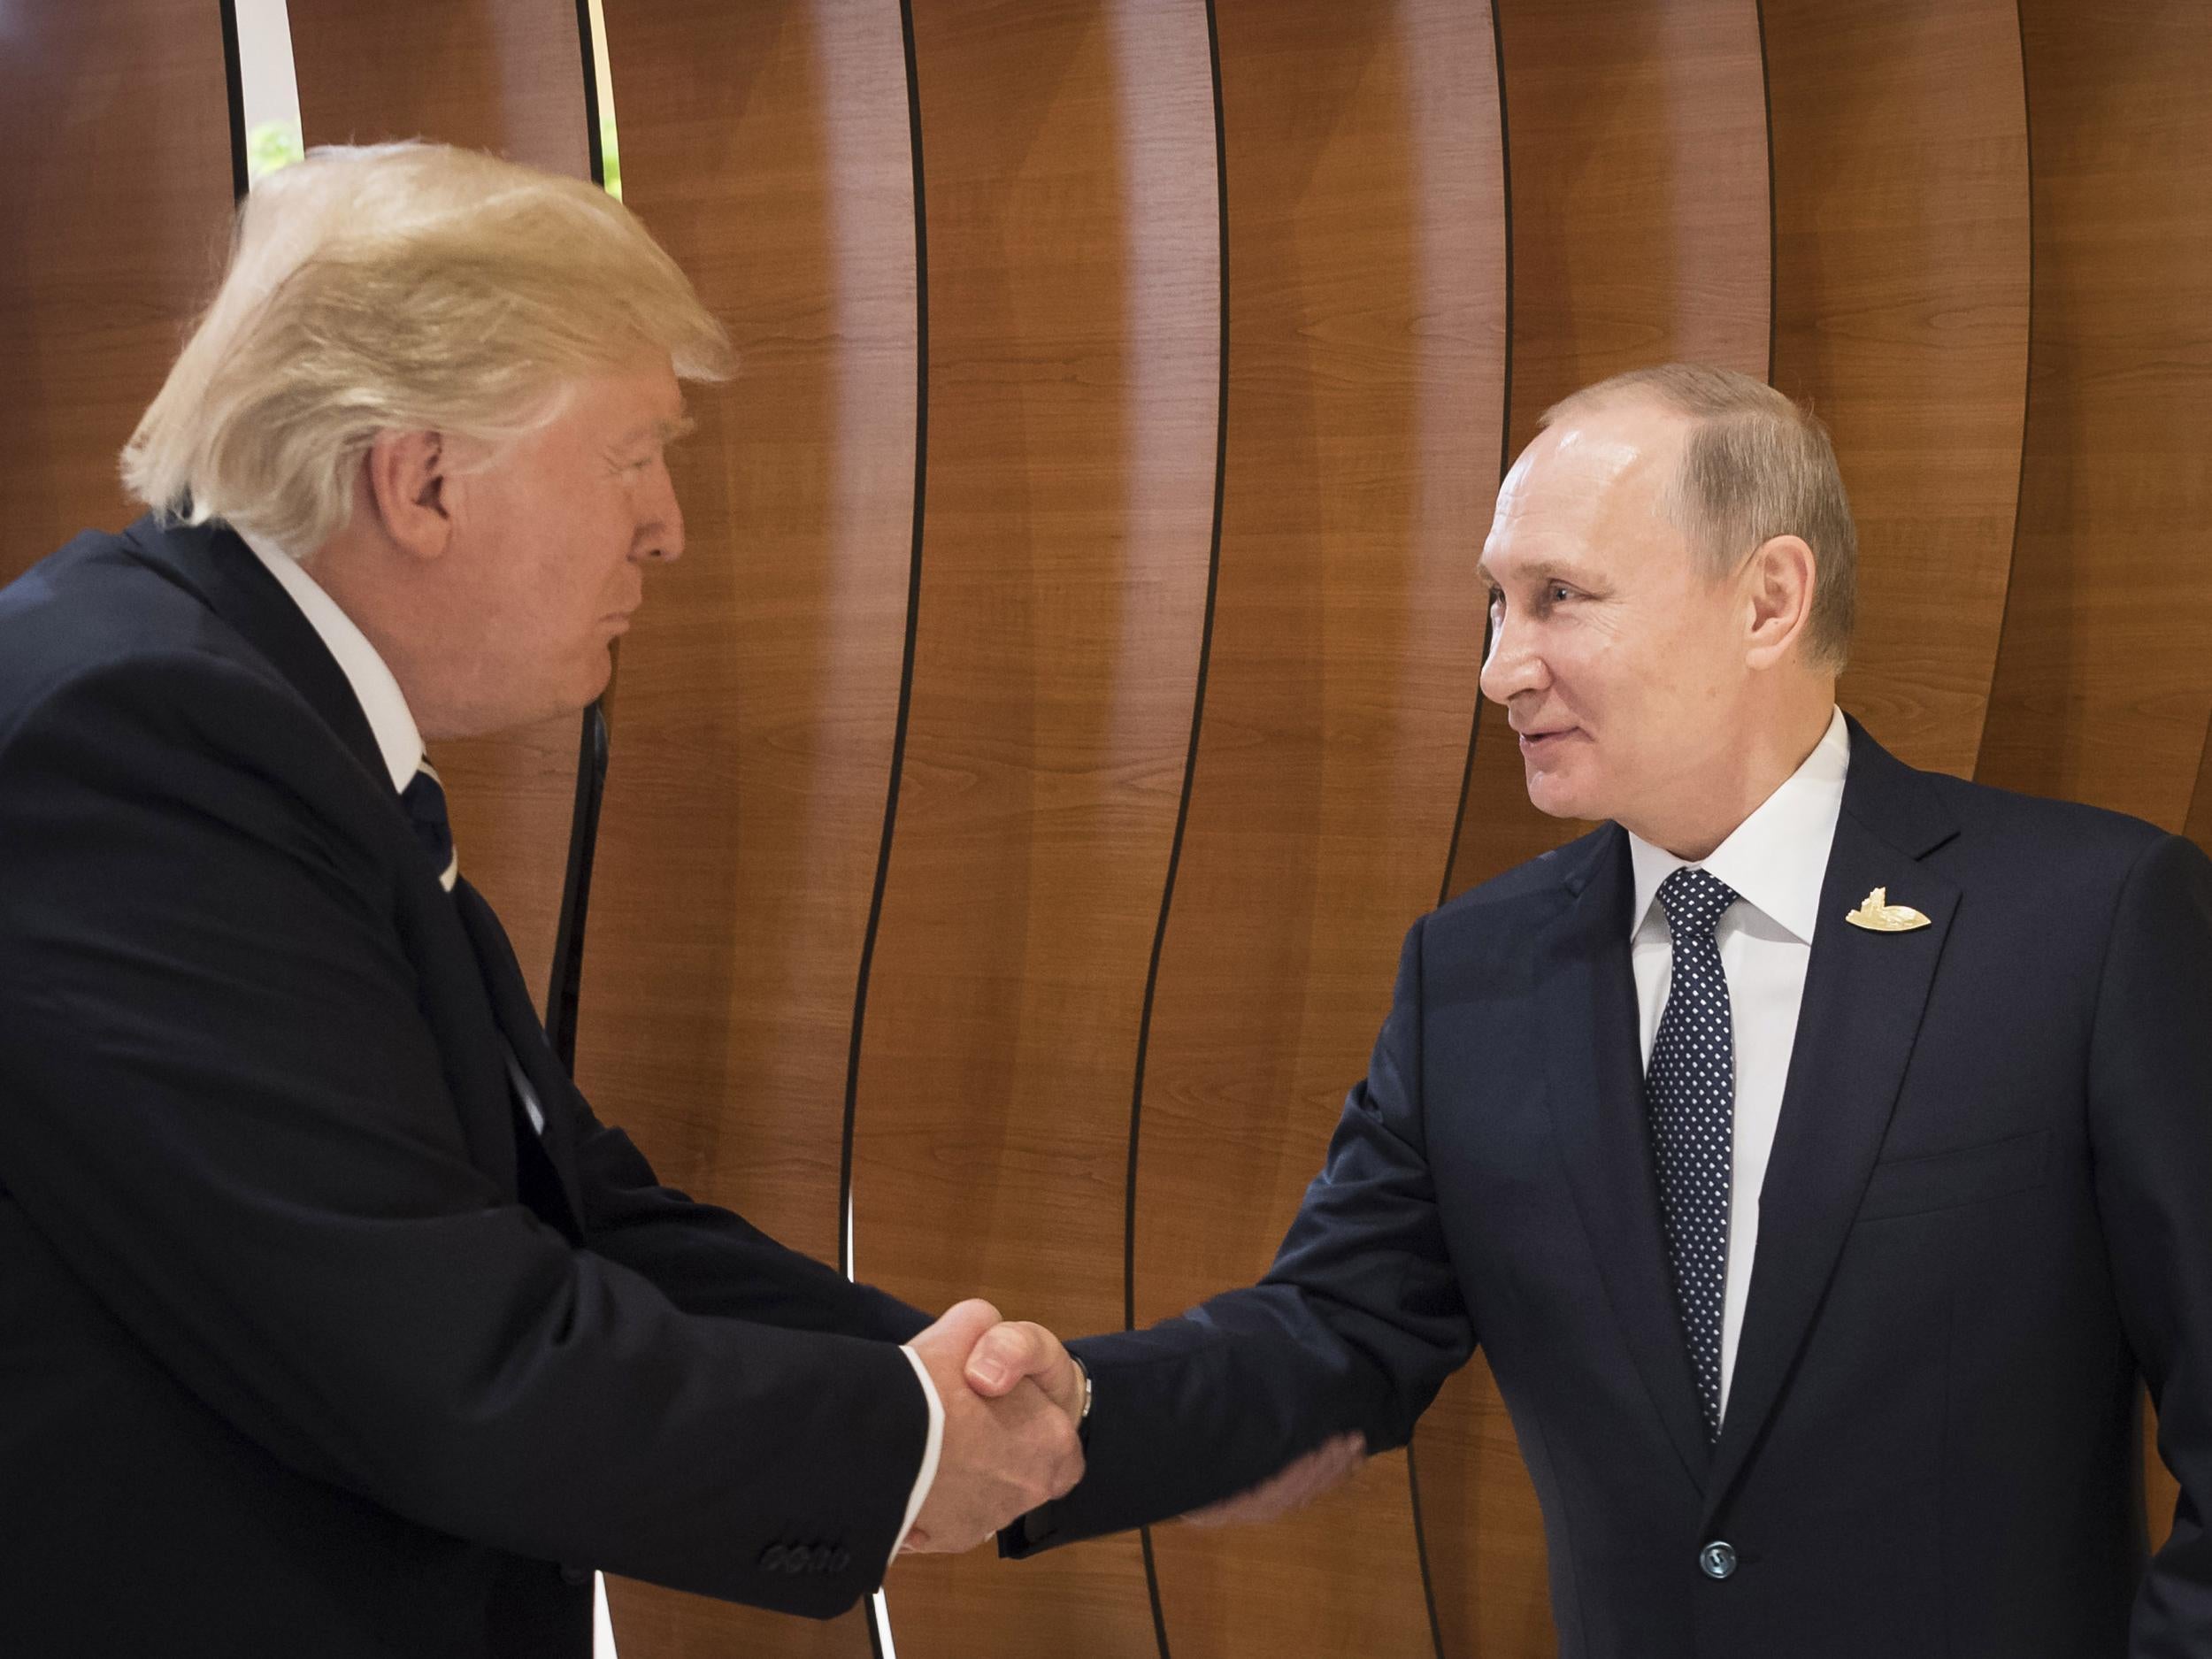 Donald Trump said it was important to 'have dialogue' with Vladimir Putin, because 'we got to solve Syria'